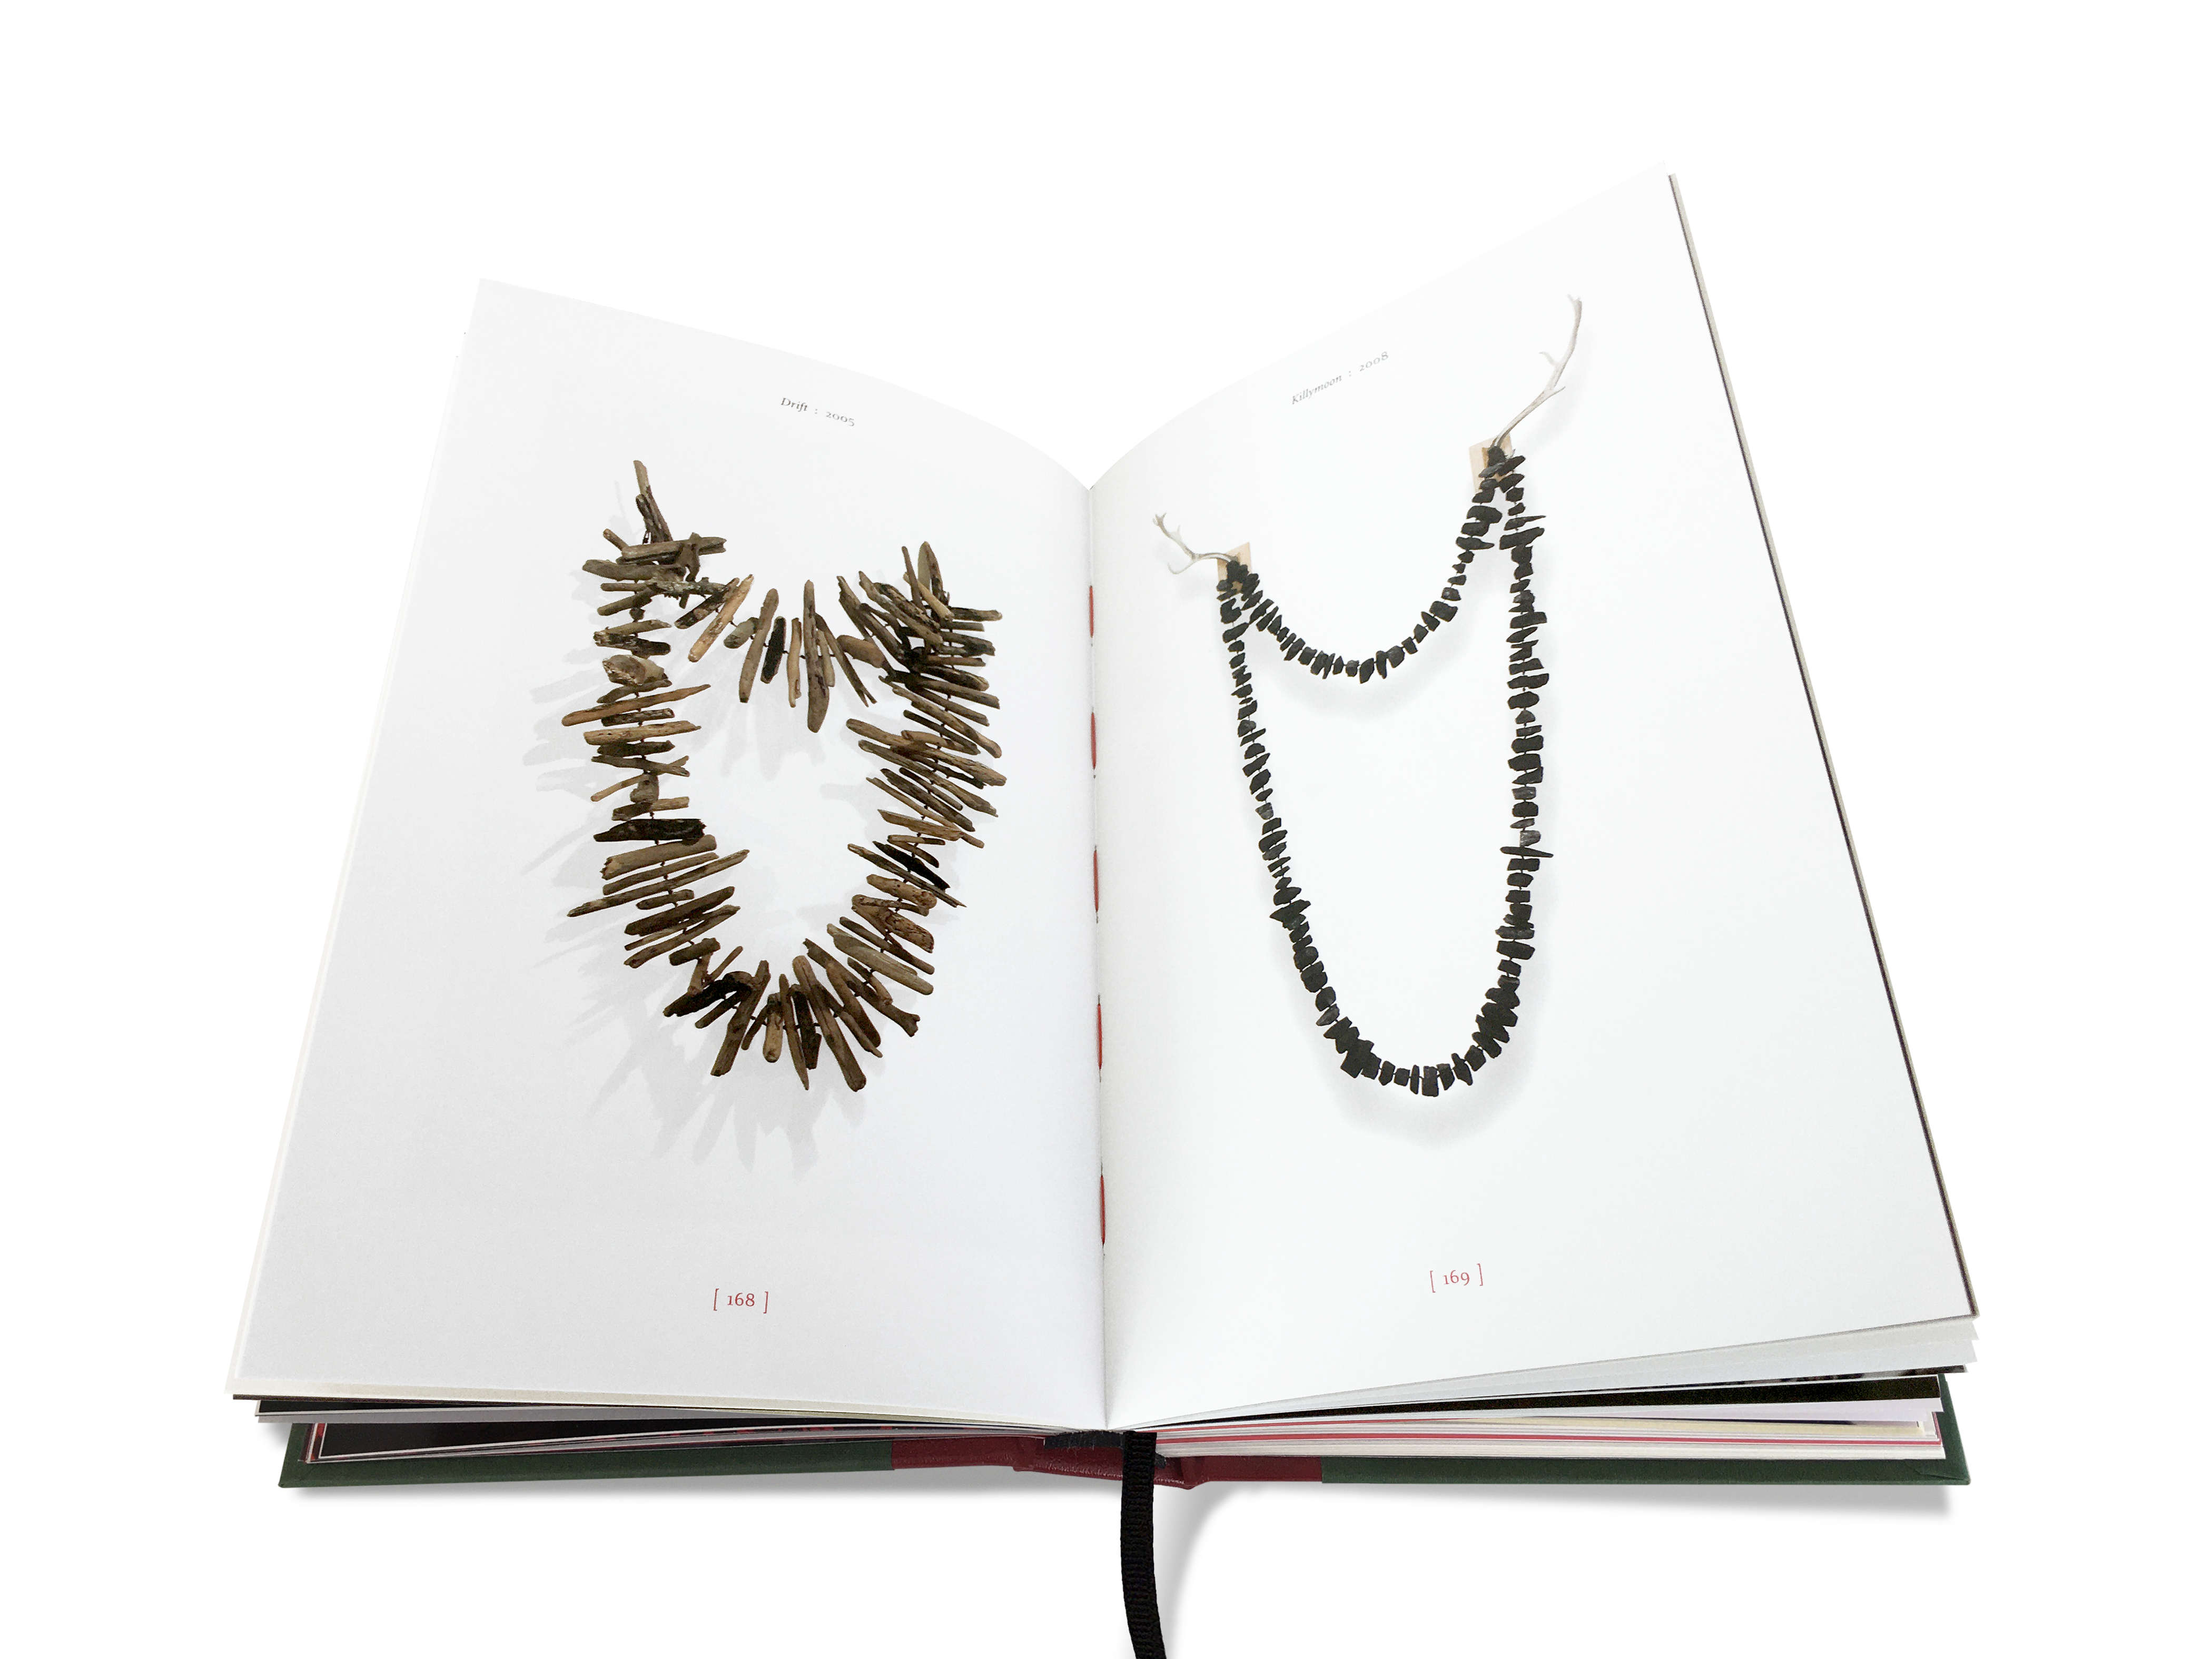 Image of a double-page spread from the TENSE PAST book (pages 168 & 169). The left-hand page features the artwork titled ‘Drift’ (2005) by Julie Gough. This large 3-D work is representative of an over-sized necklace made from driftwood. The right-hand page features the artwork titled ‘Killymoon’ (2008) by Julie Gough. This large 3-D work is representative of an over-sized necklace made from lumps of Fingal Valley coal, hanging from fallow deer antlers on wooden fixing points.